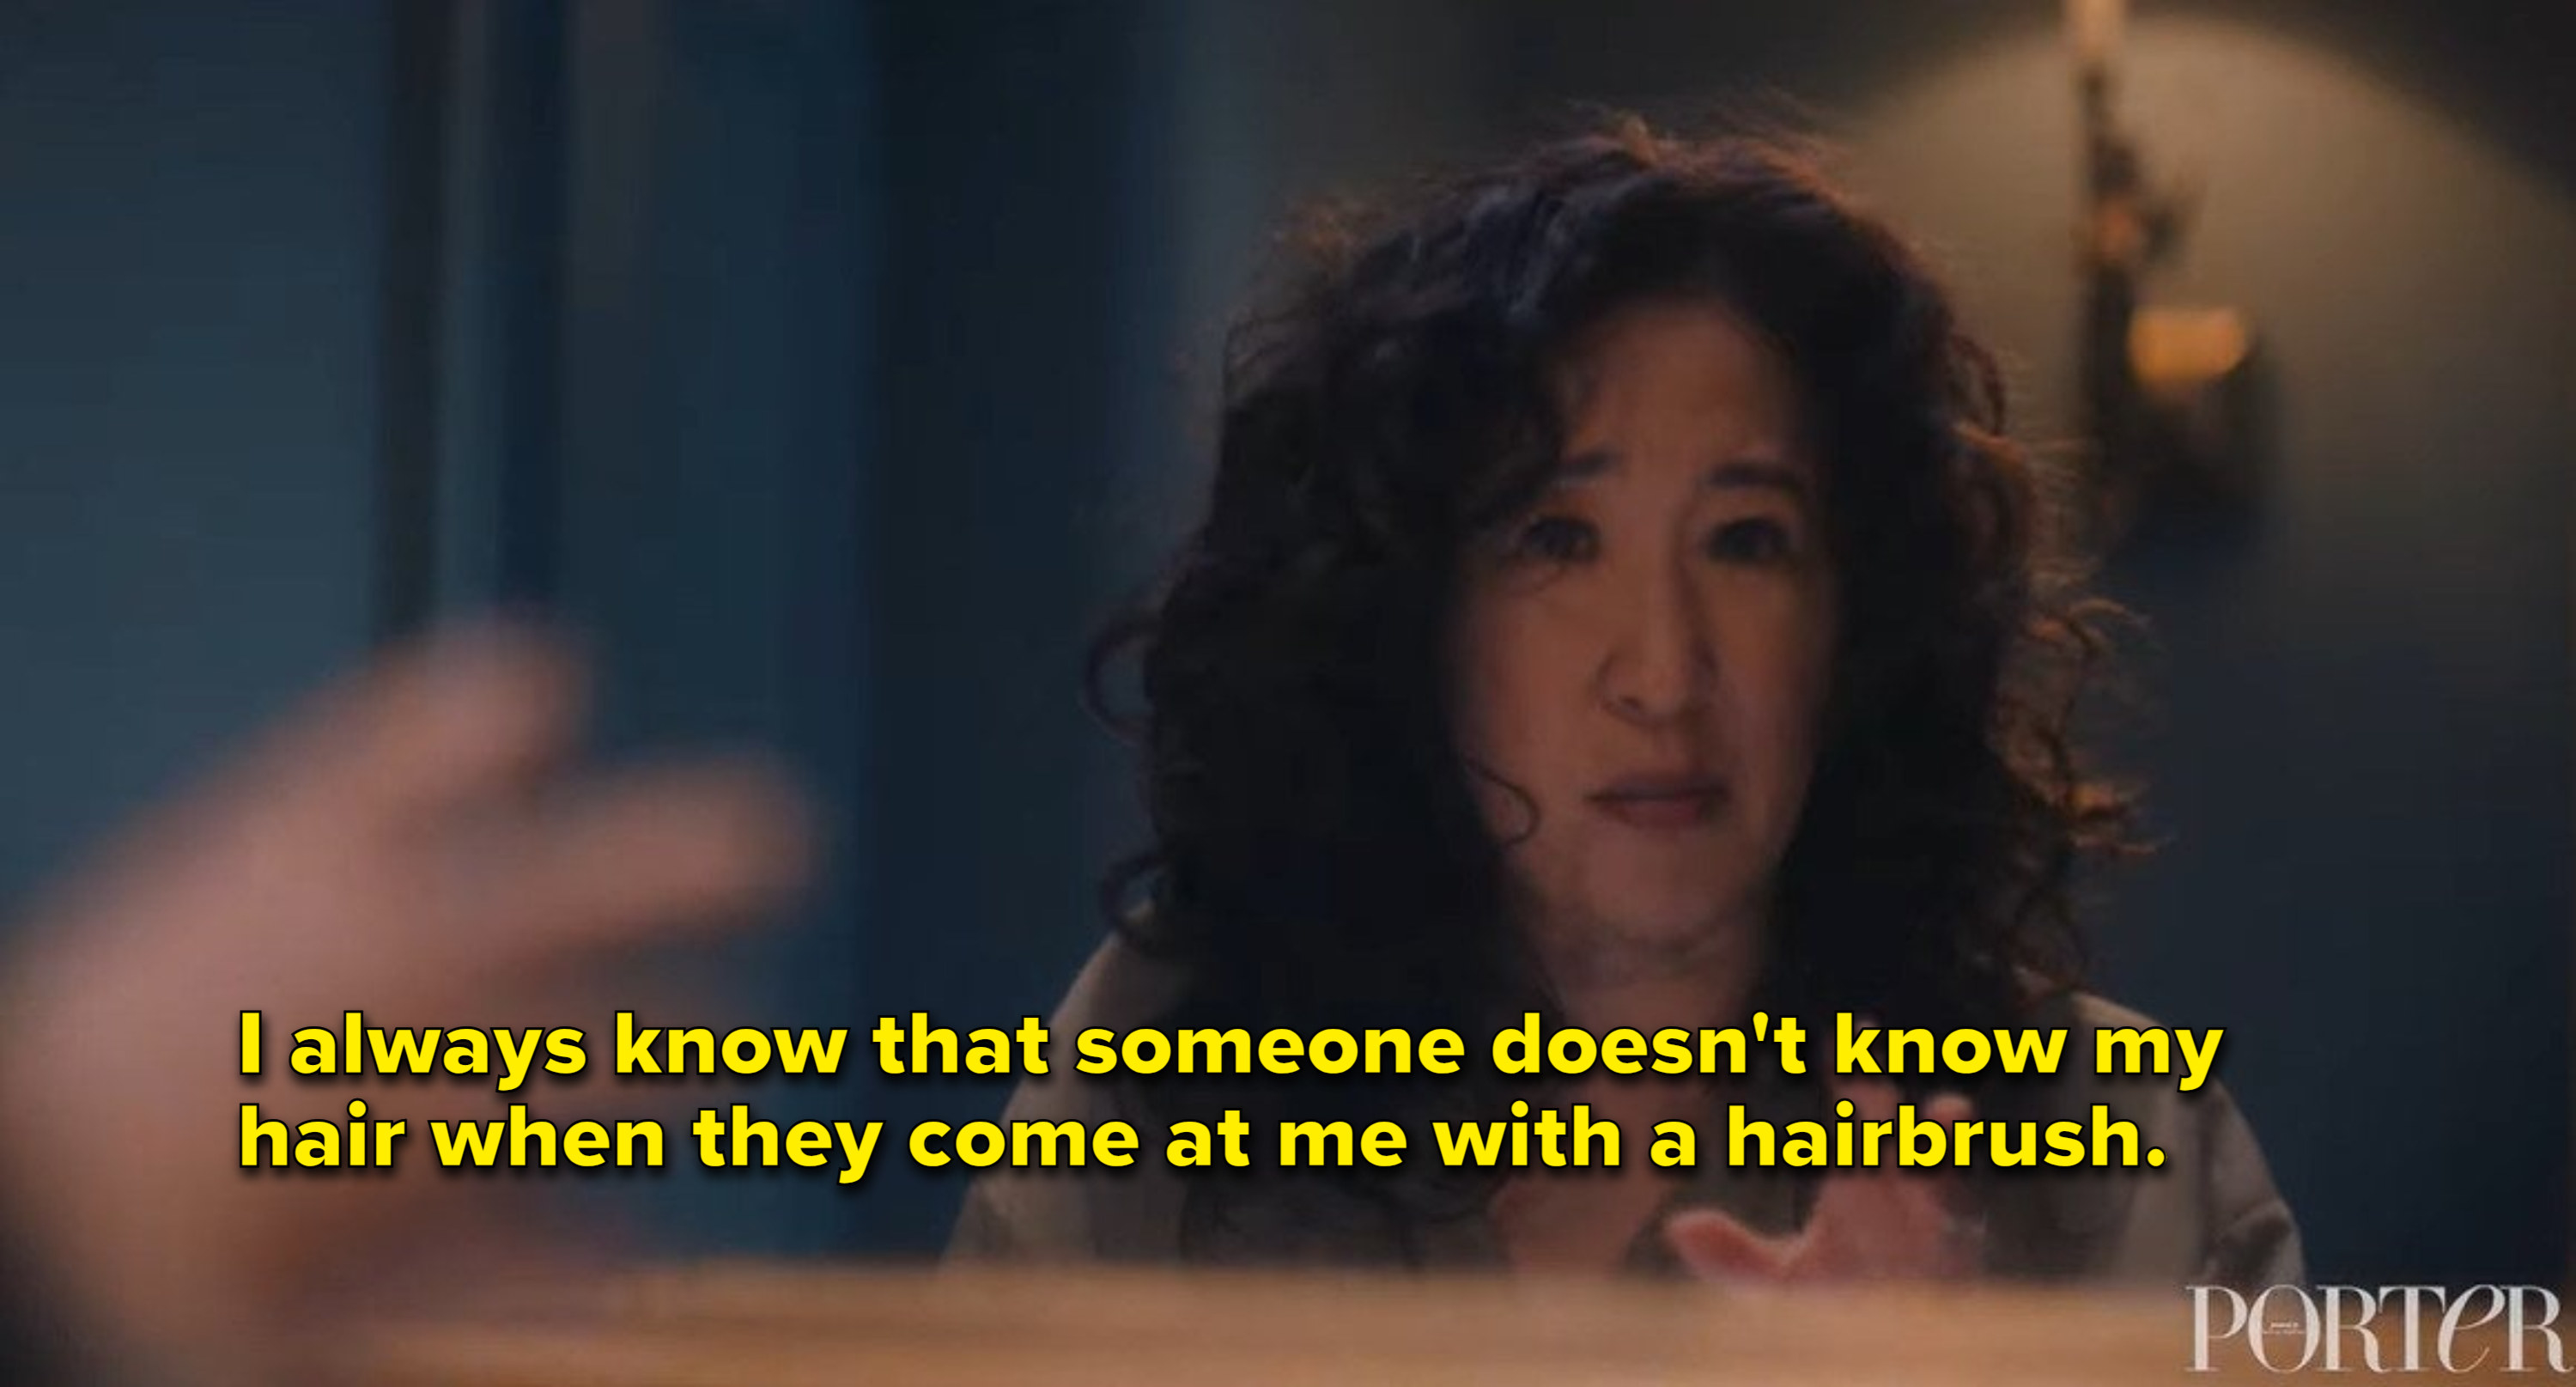 Sandra Oh: &quot;I always know that someone doesn&#x27;t know my hair when they come at me with a hairbrush&quot;